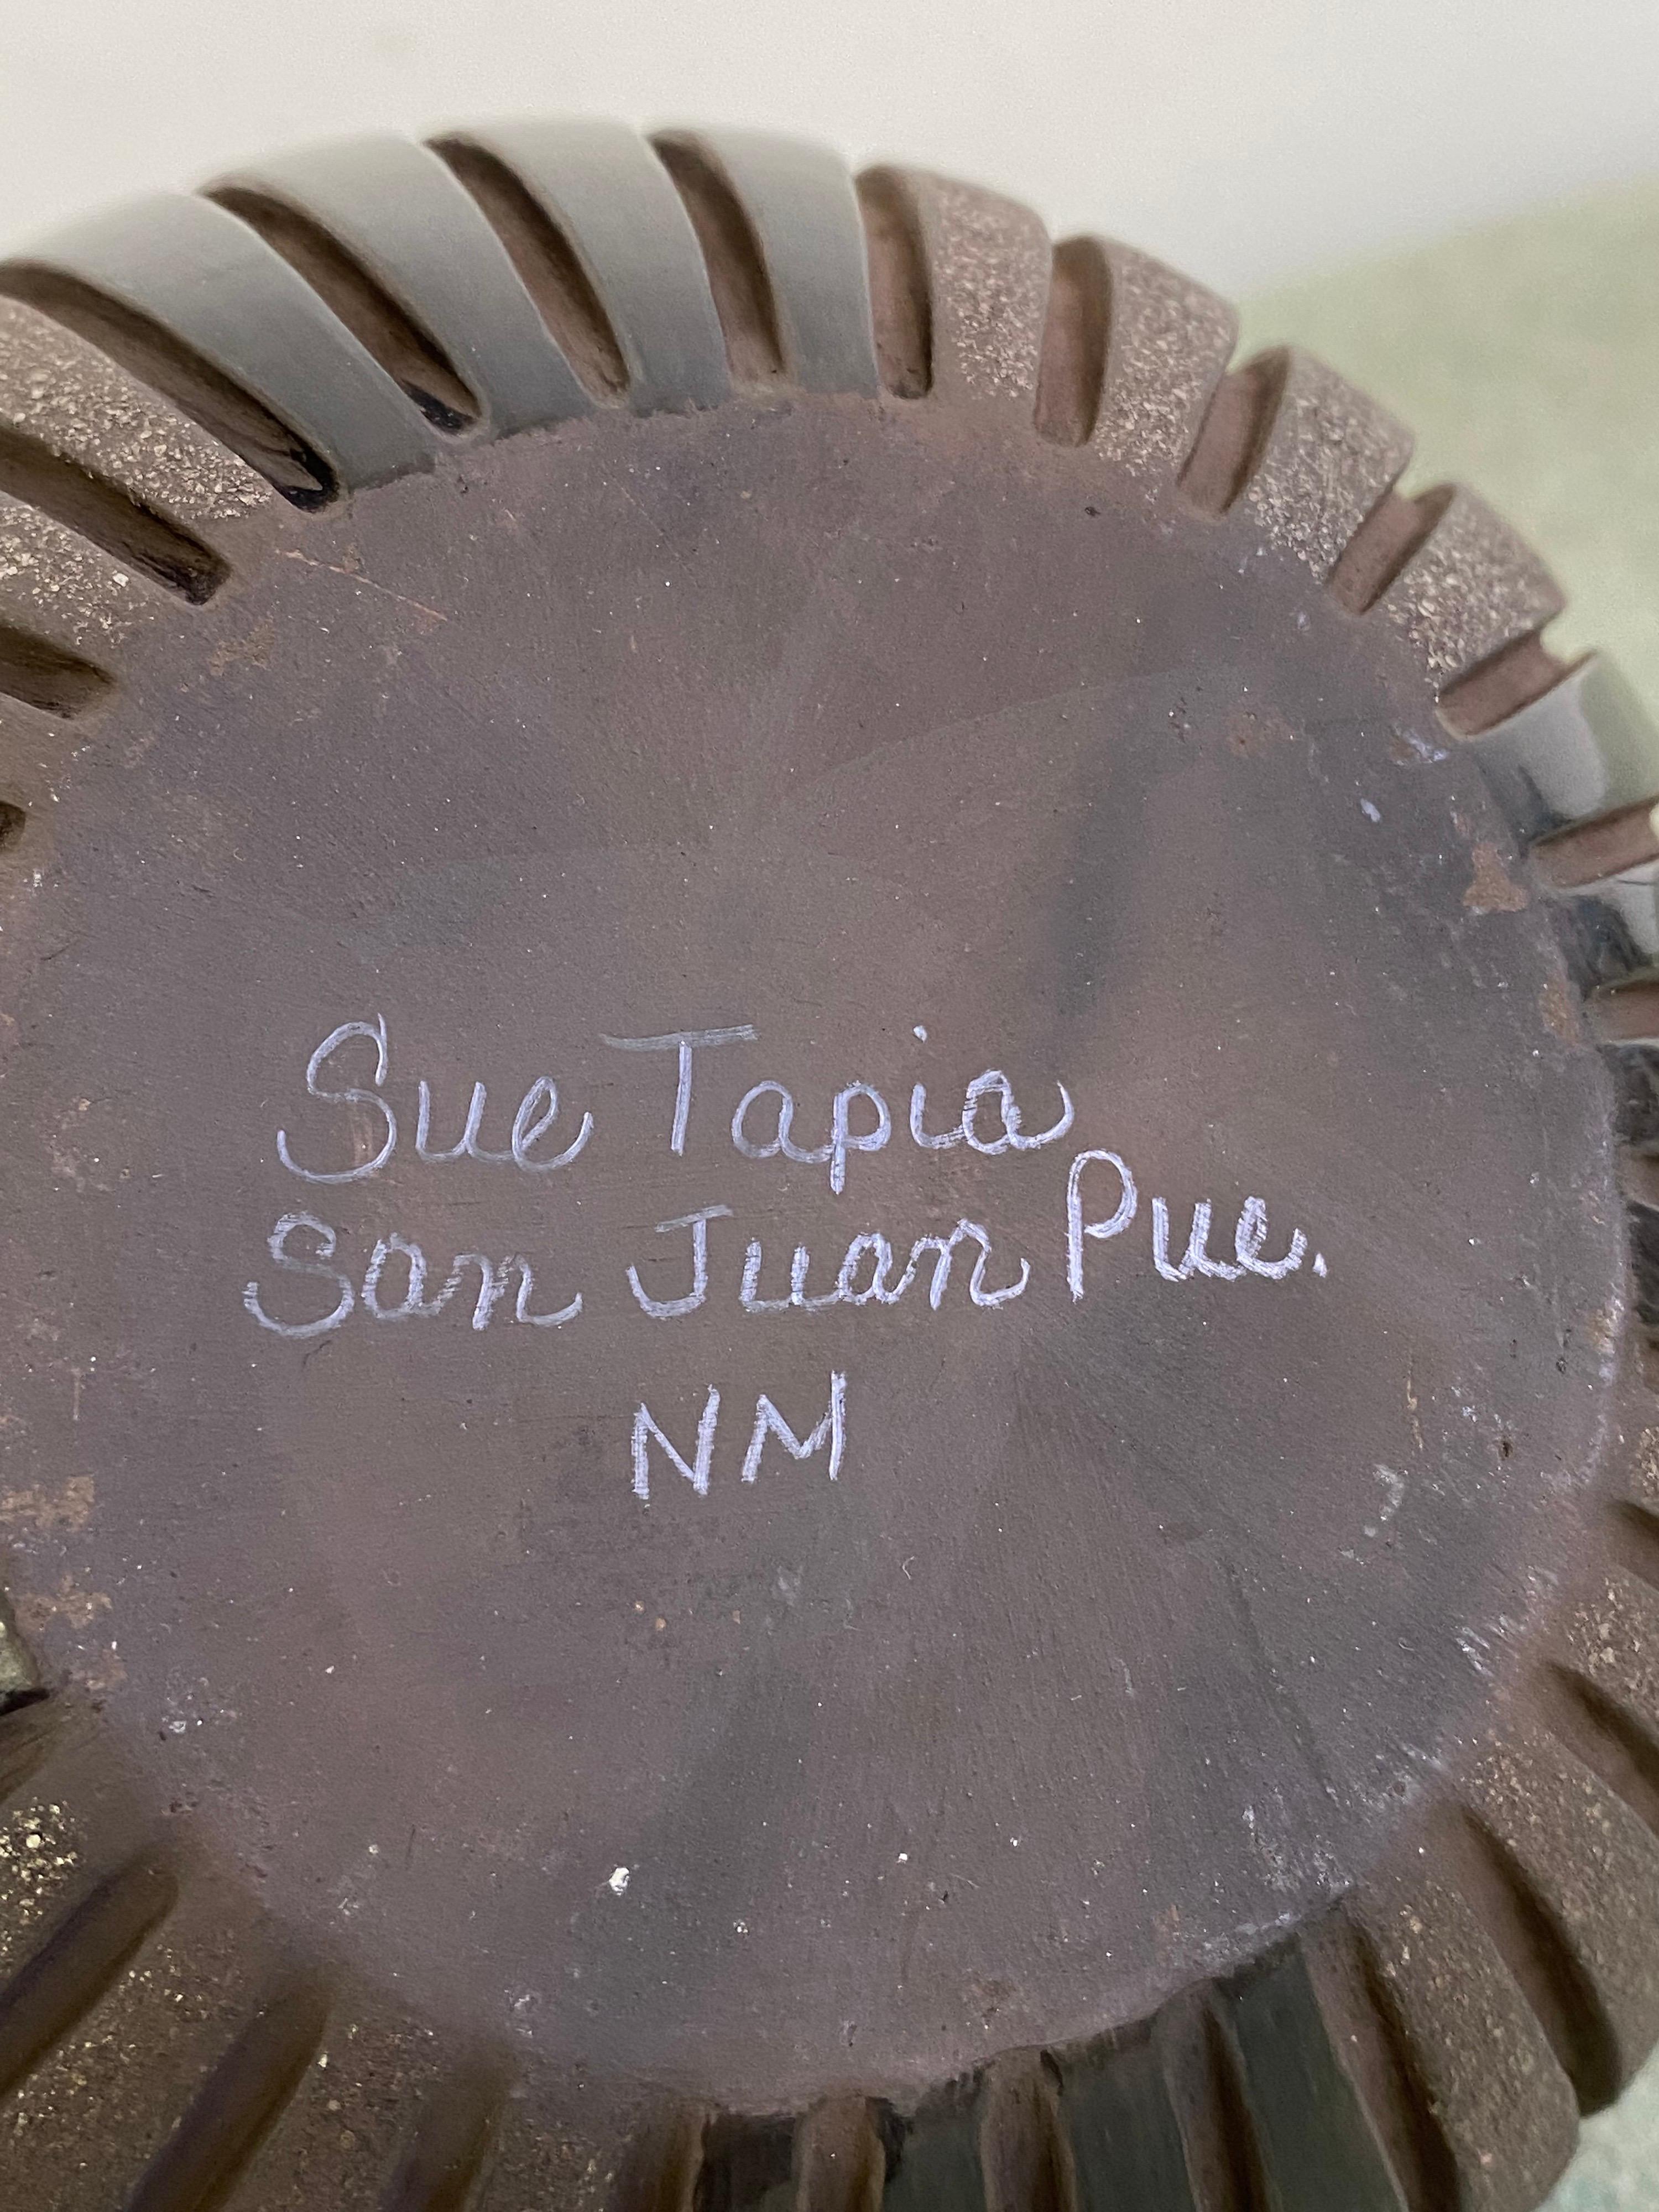 Anglo-Indian Sue Tapia Incised Pot For Sale